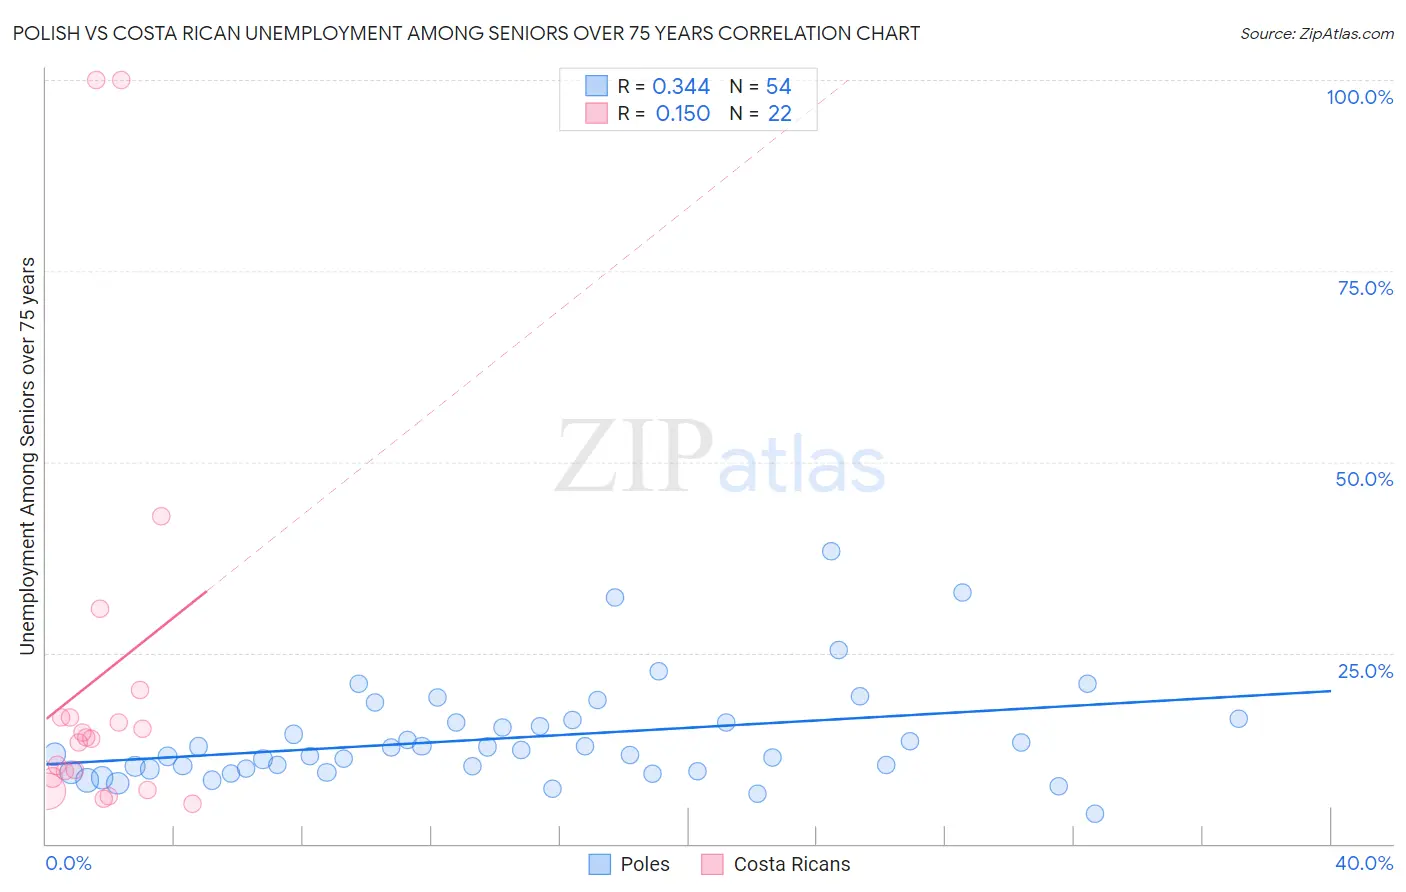 Polish vs Costa Rican Unemployment Among Seniors over 75 years